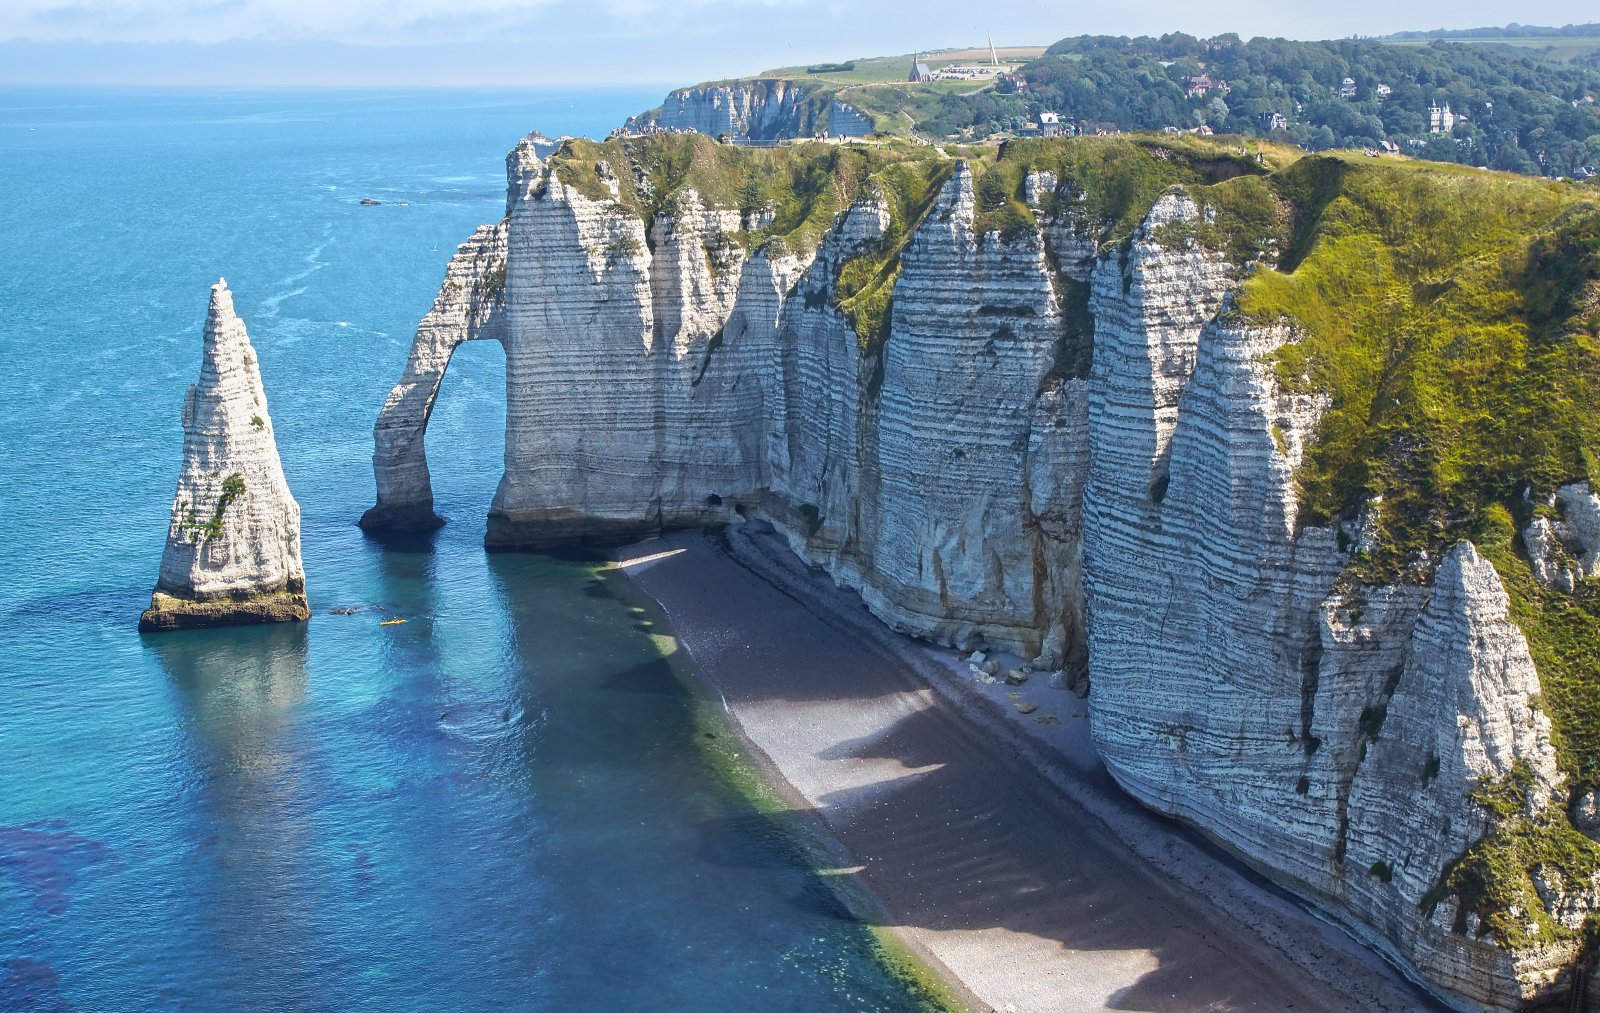 <p class="wp-caption-text">Image Credit: Shutterstock / Igor Plotnikov</p>  <p>The dramatic natural arches and pointed needle of Étretat offer a majestic seaside view, inspiring artists and travelers for generations.</p>